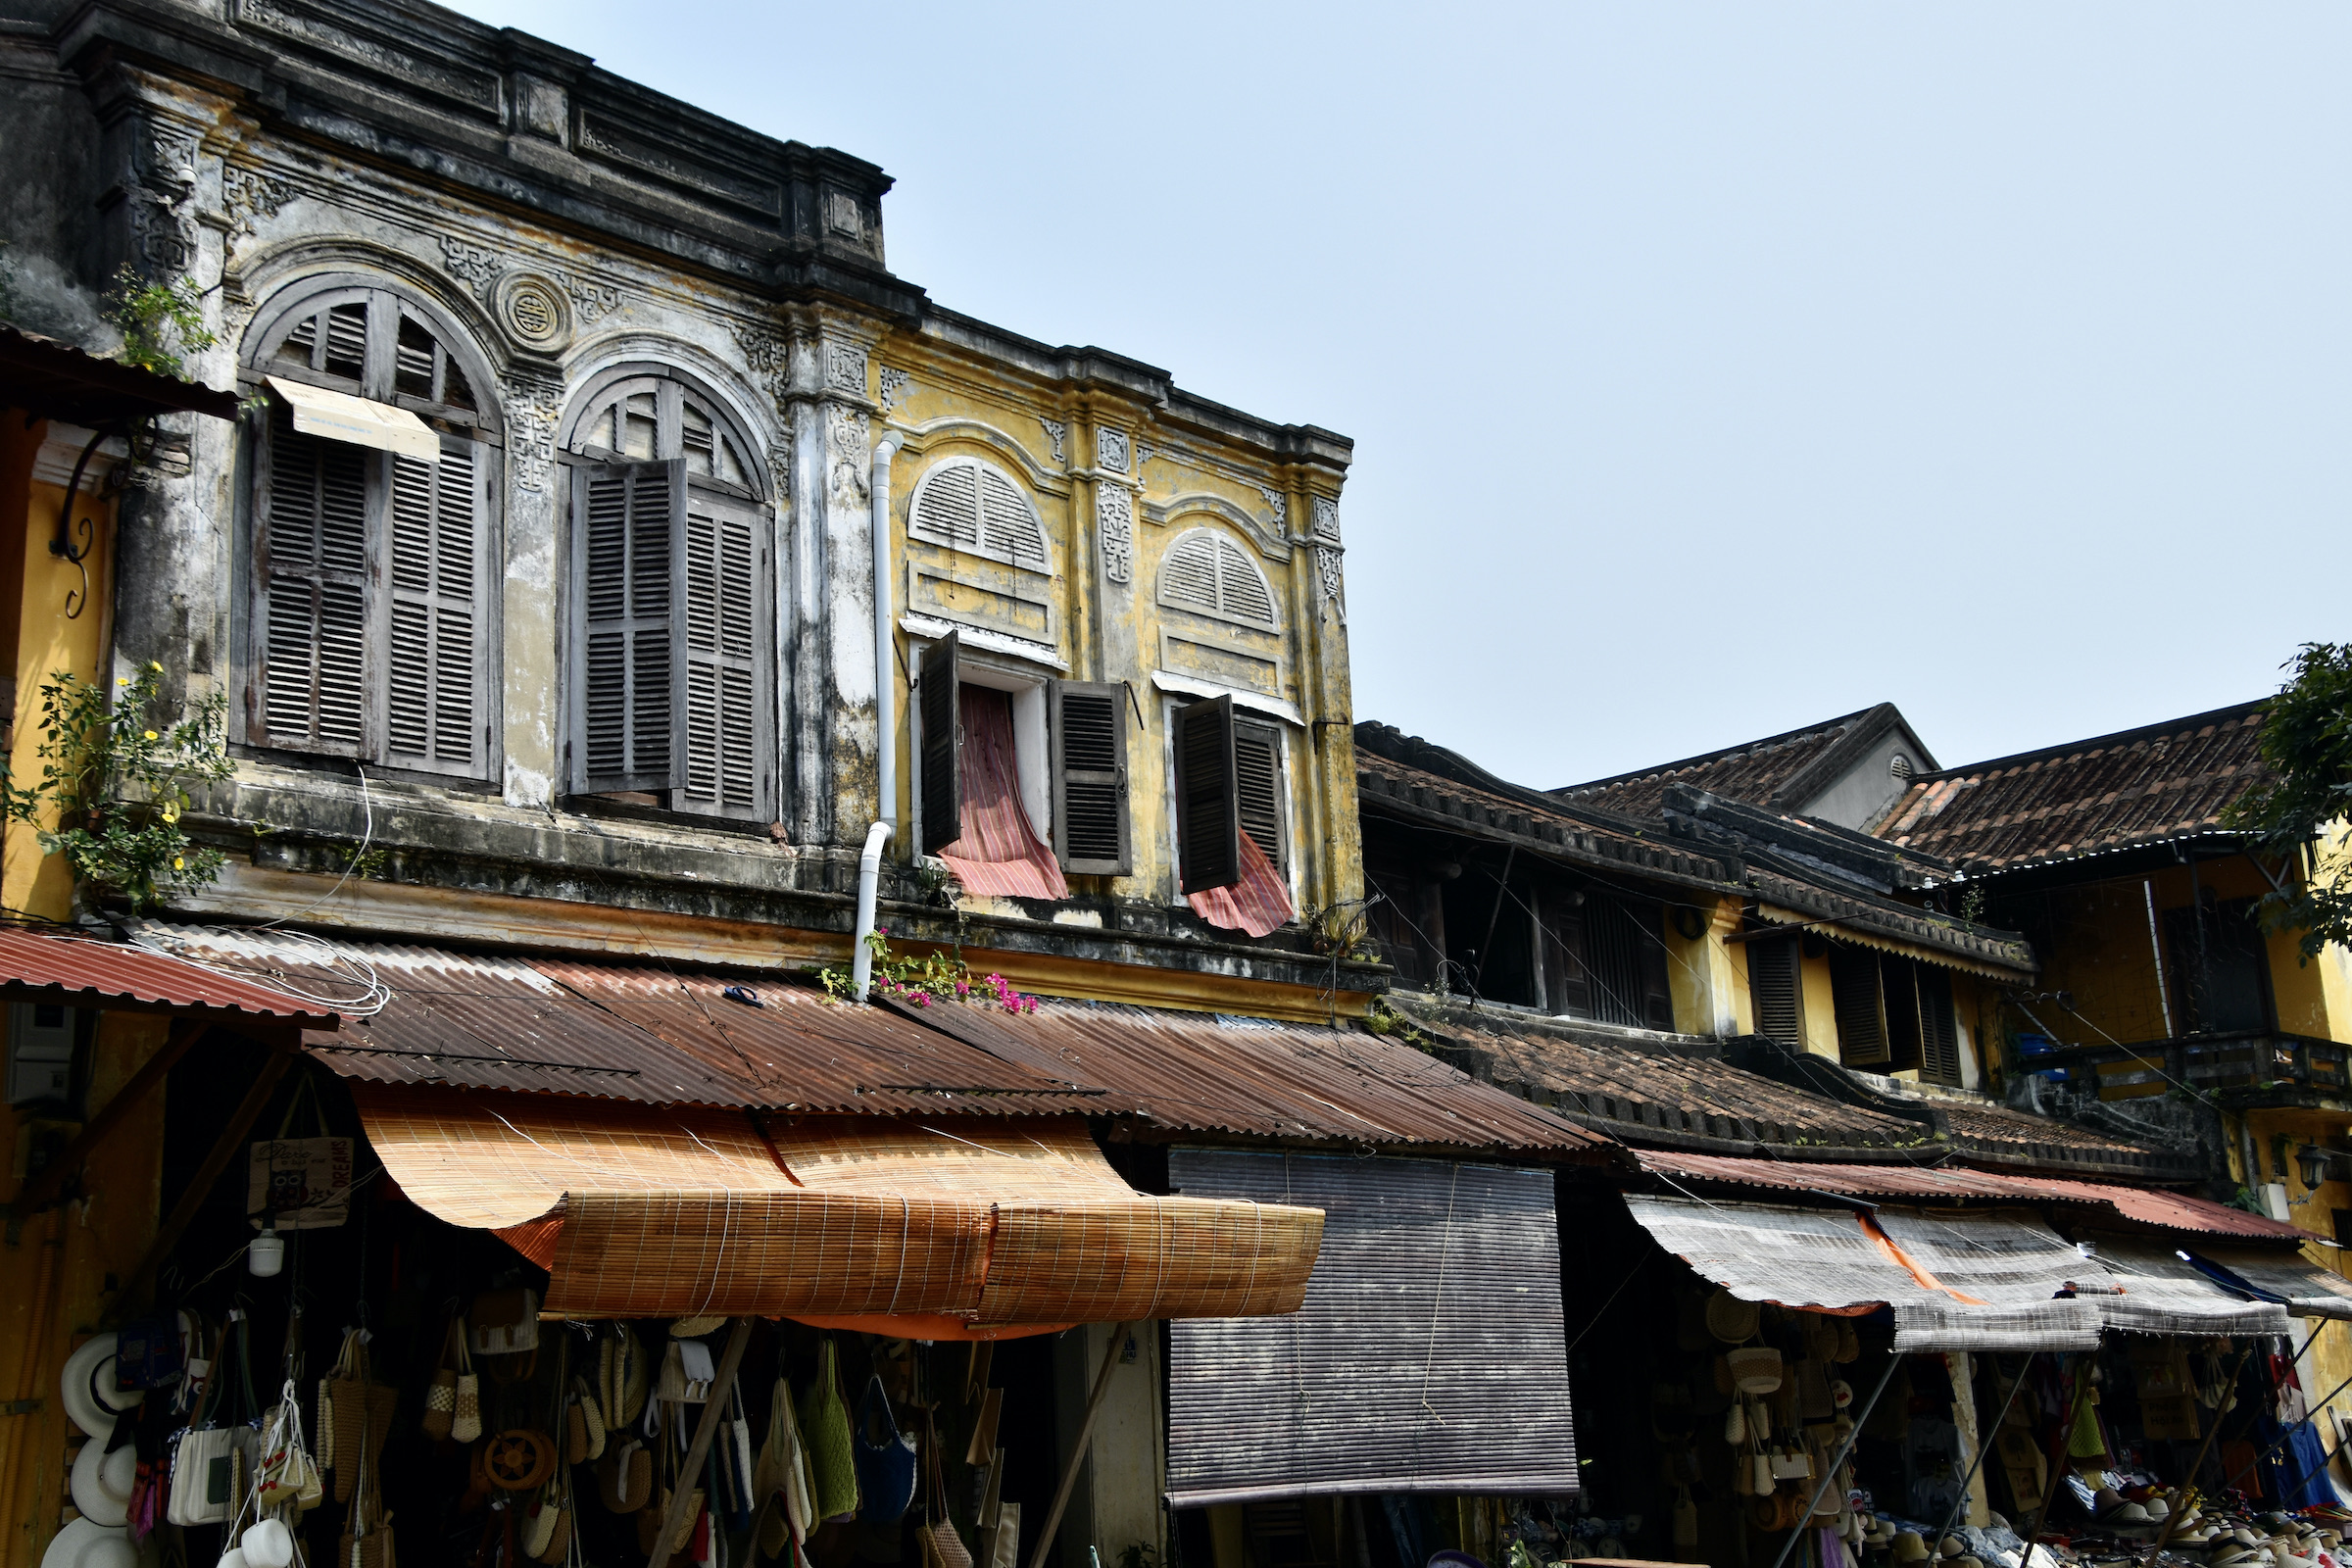 Chinese Wooden Houses, Hoi An